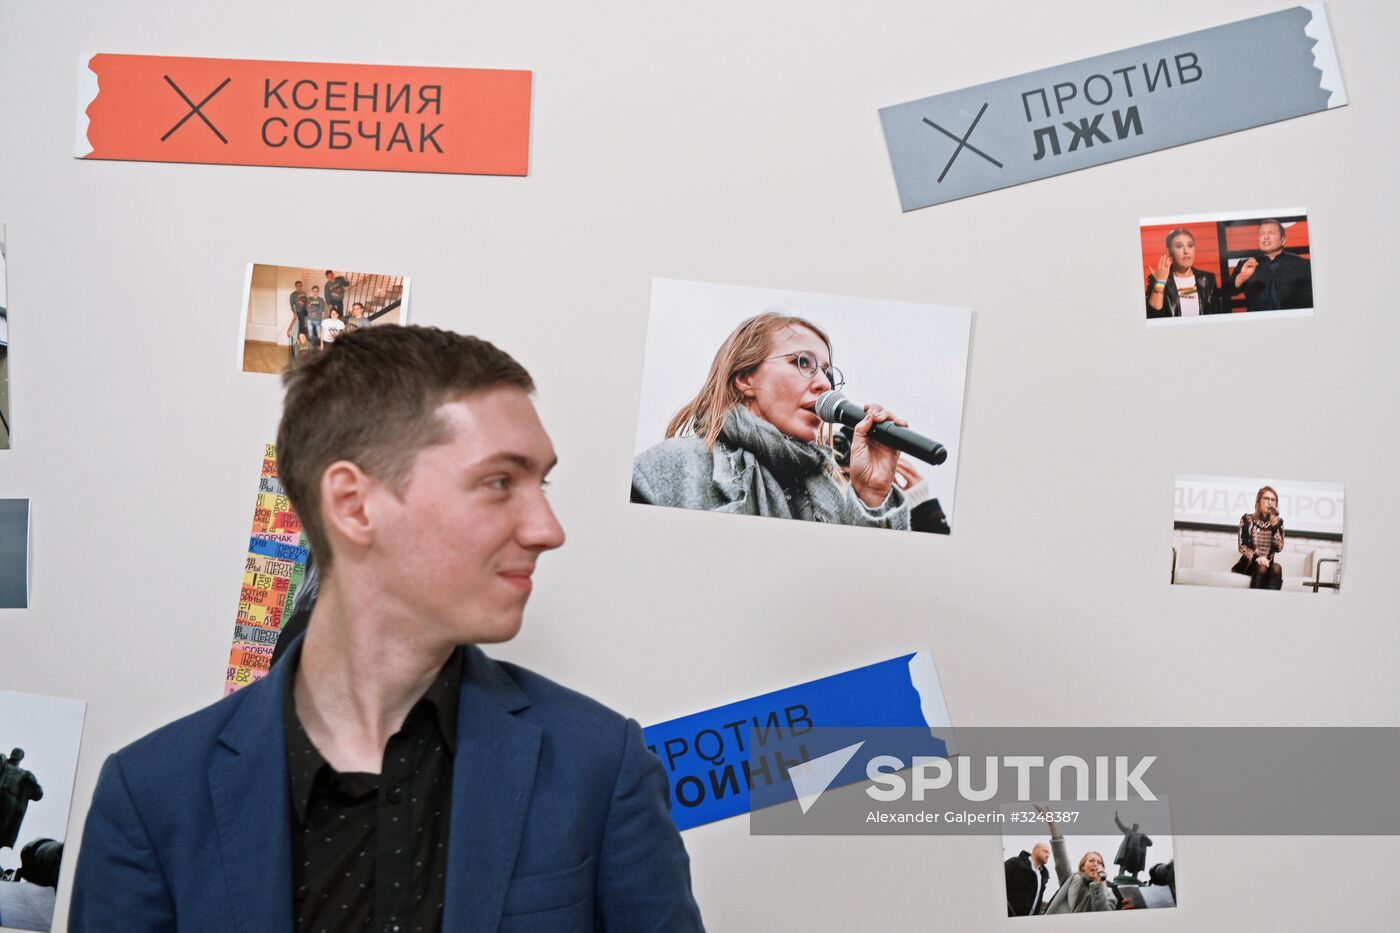 Ksenia Sobchak launches election campaign headquarters in St. Petersburg